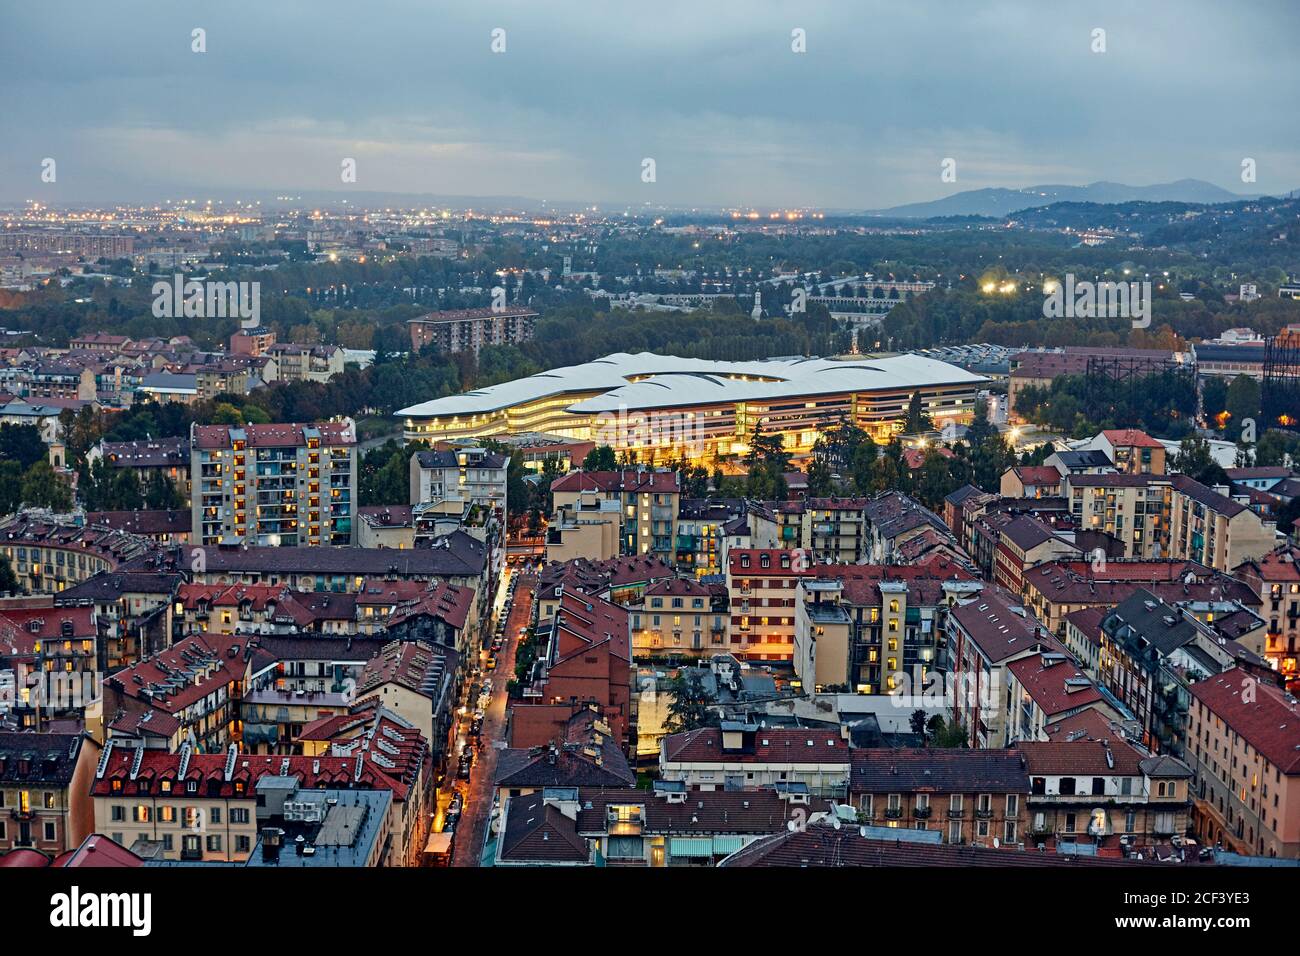 Aerial view of the skyline of Turin illuminated at dusk with Norman Foster designed Campus Stock Photo